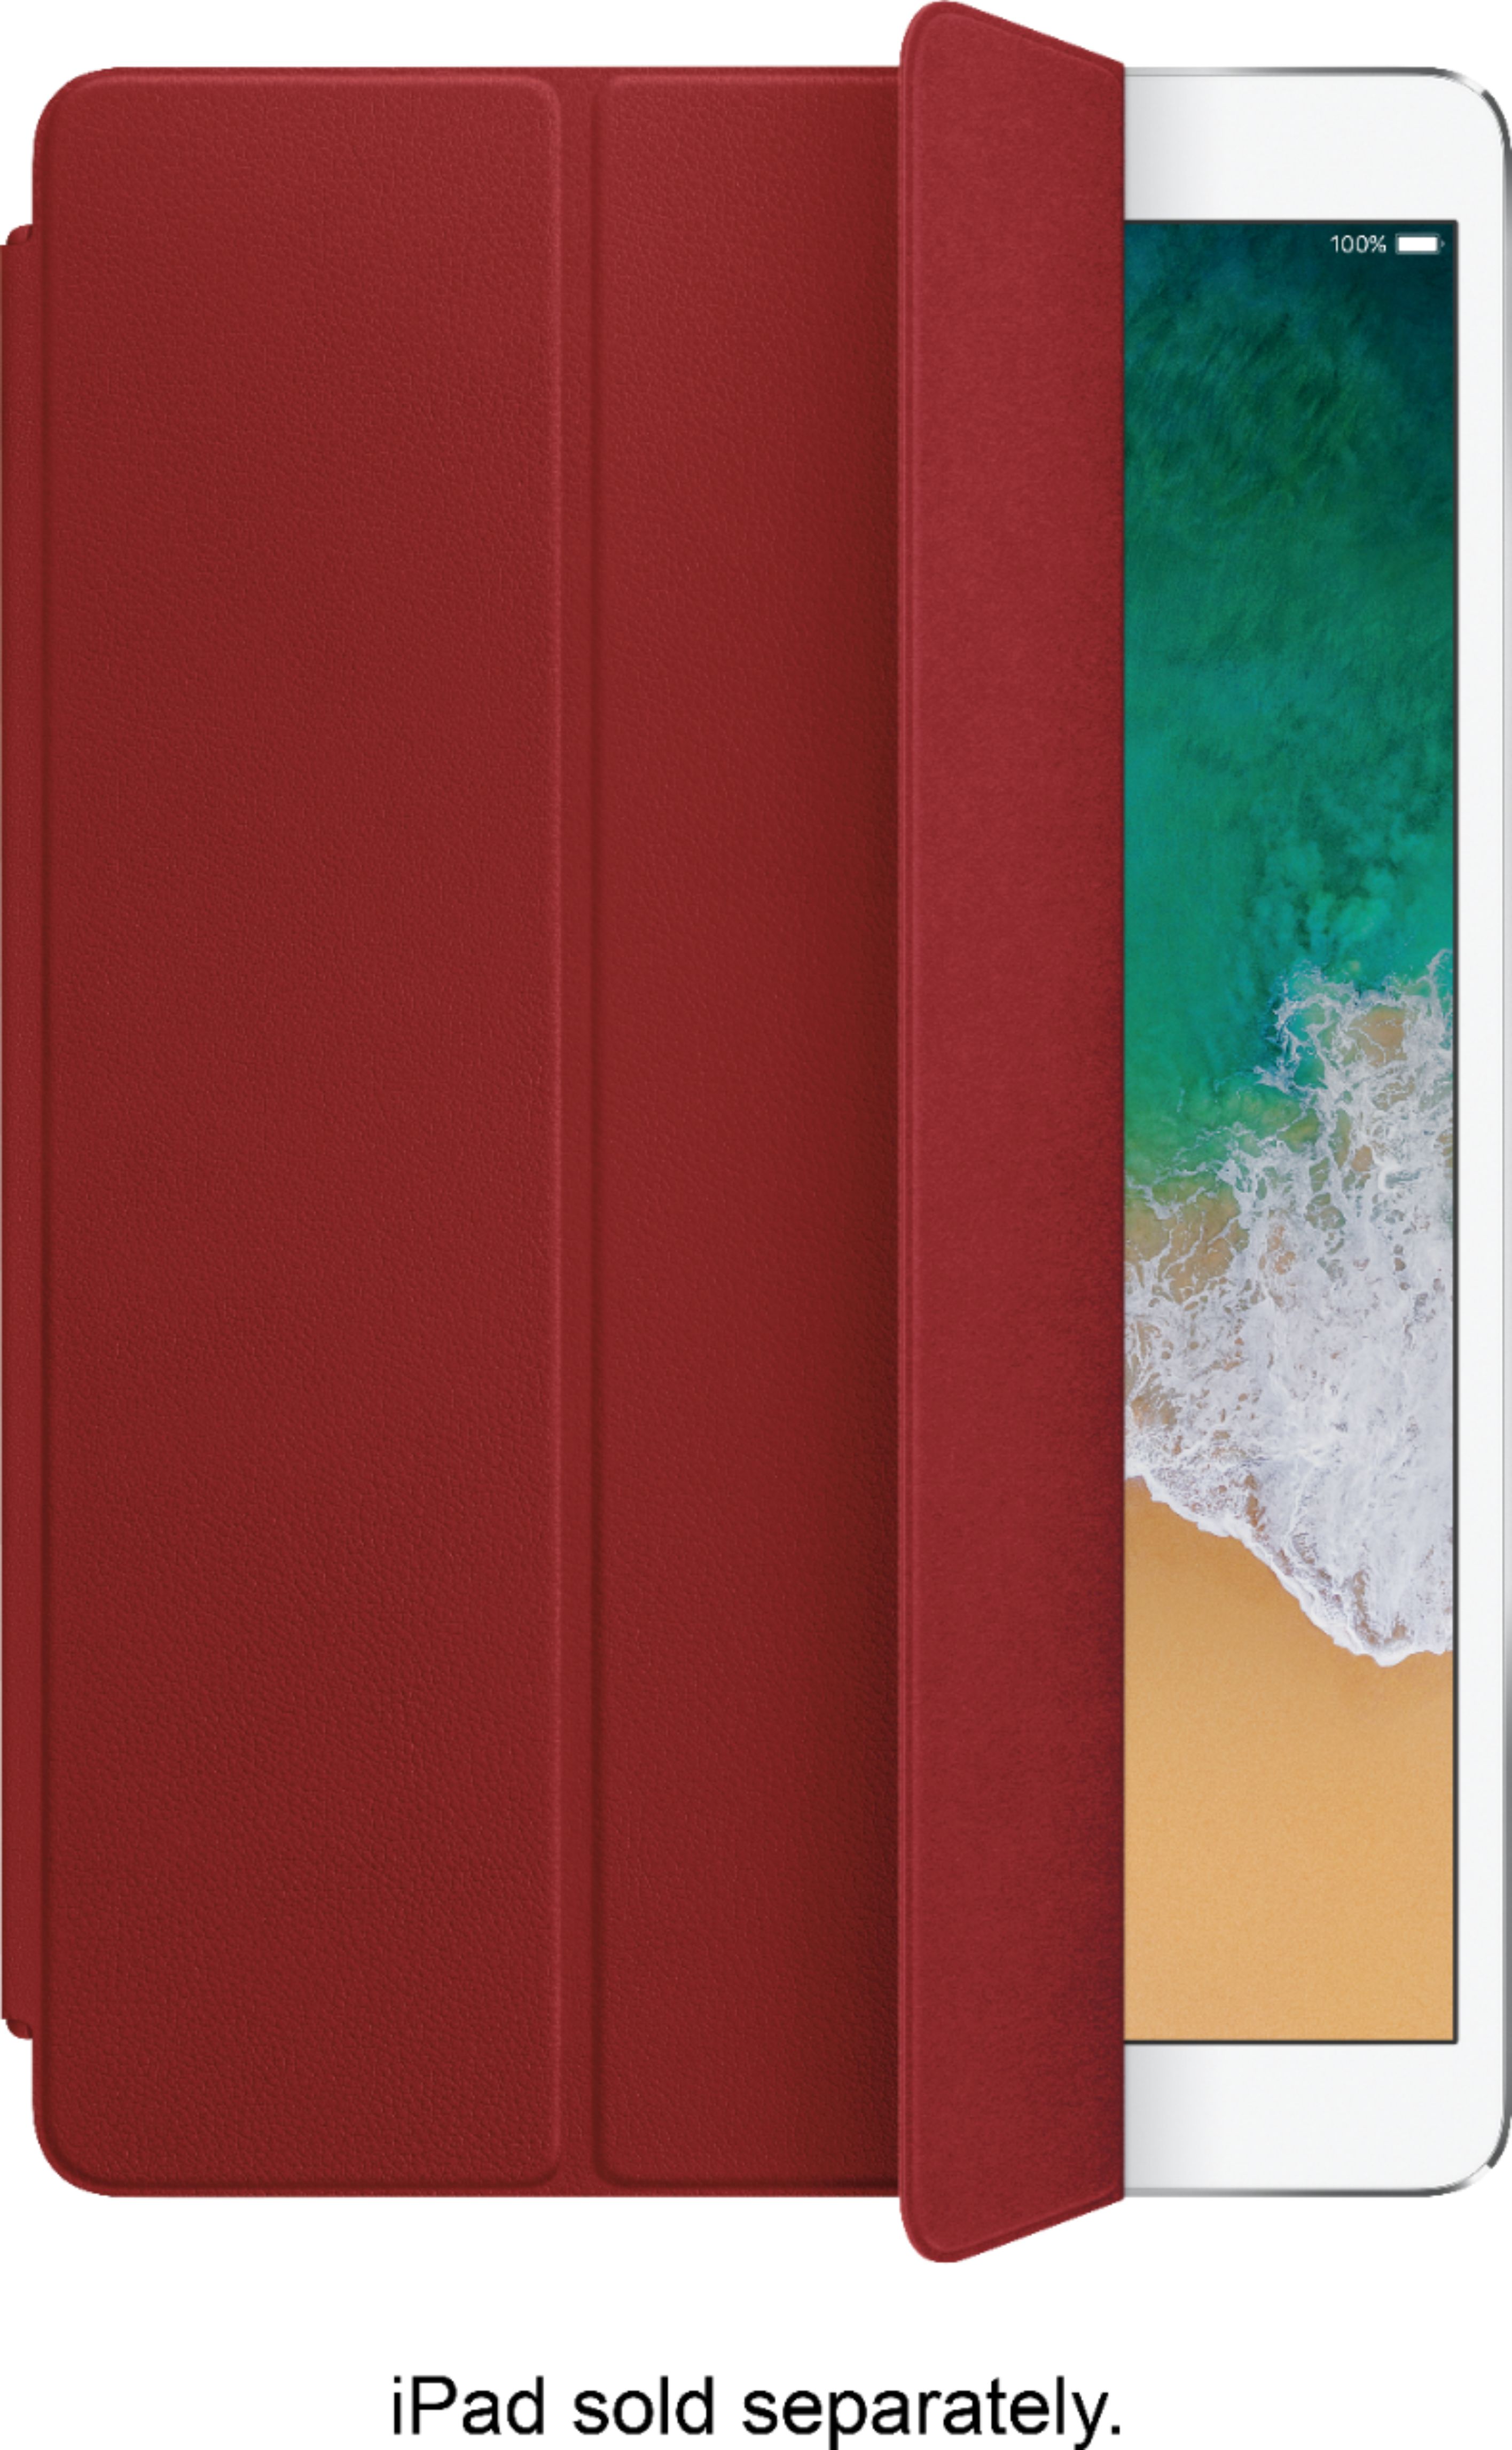 Smart Cover for iPad Mini 6 - Burgundy - Smooth Leather